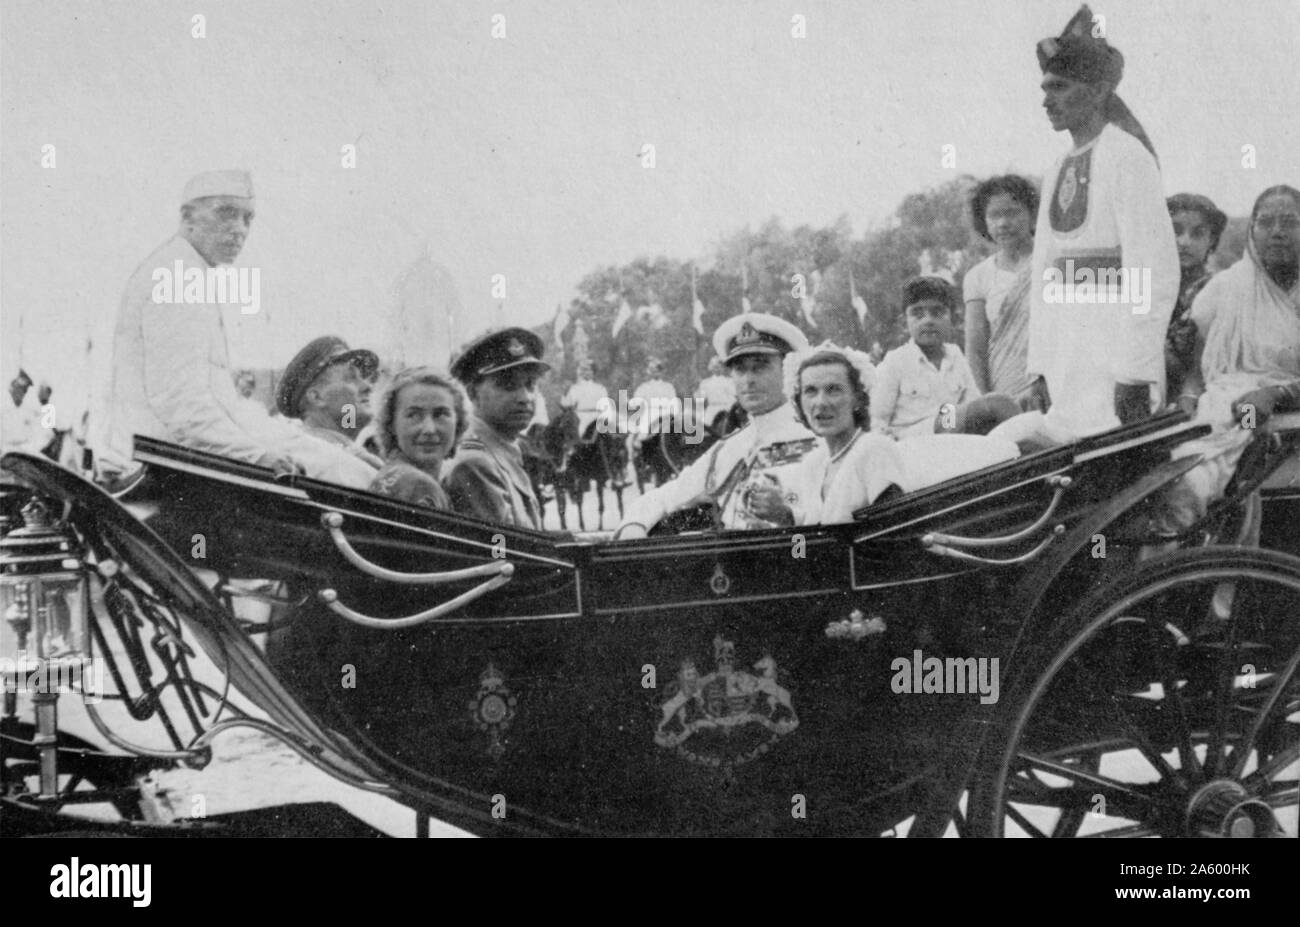 Lord Mountbatten Viceroy of India at the ceremony marking the independence of India 1947 Stock Photo